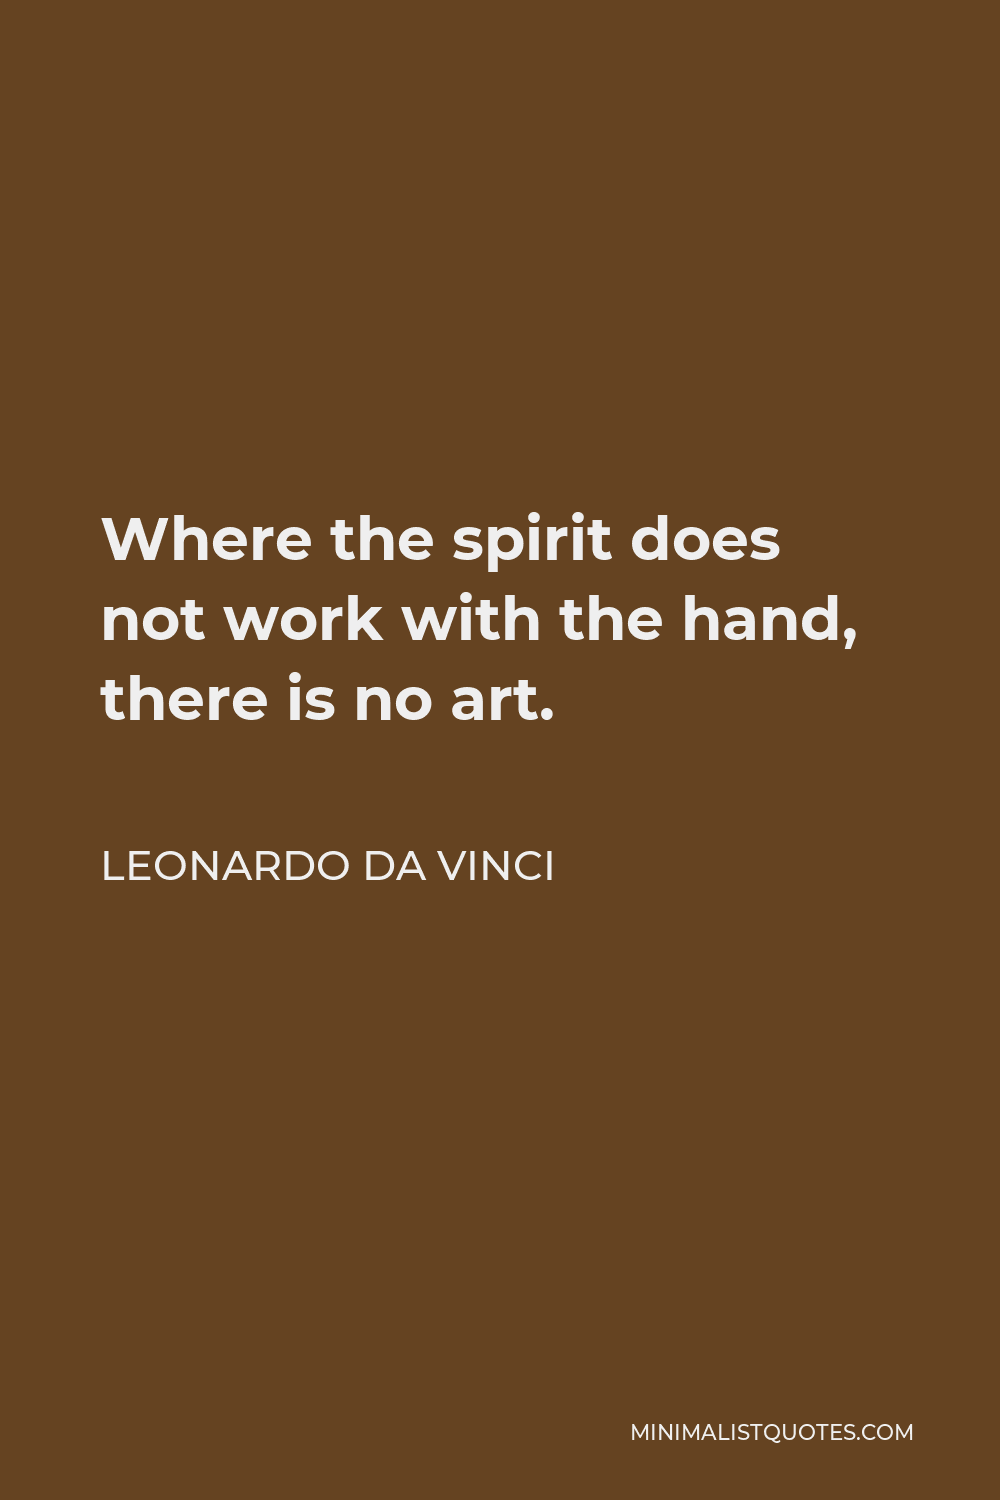 Leonardo da Vinci Quote - Where the spirit does not work with the hand, there is no art.